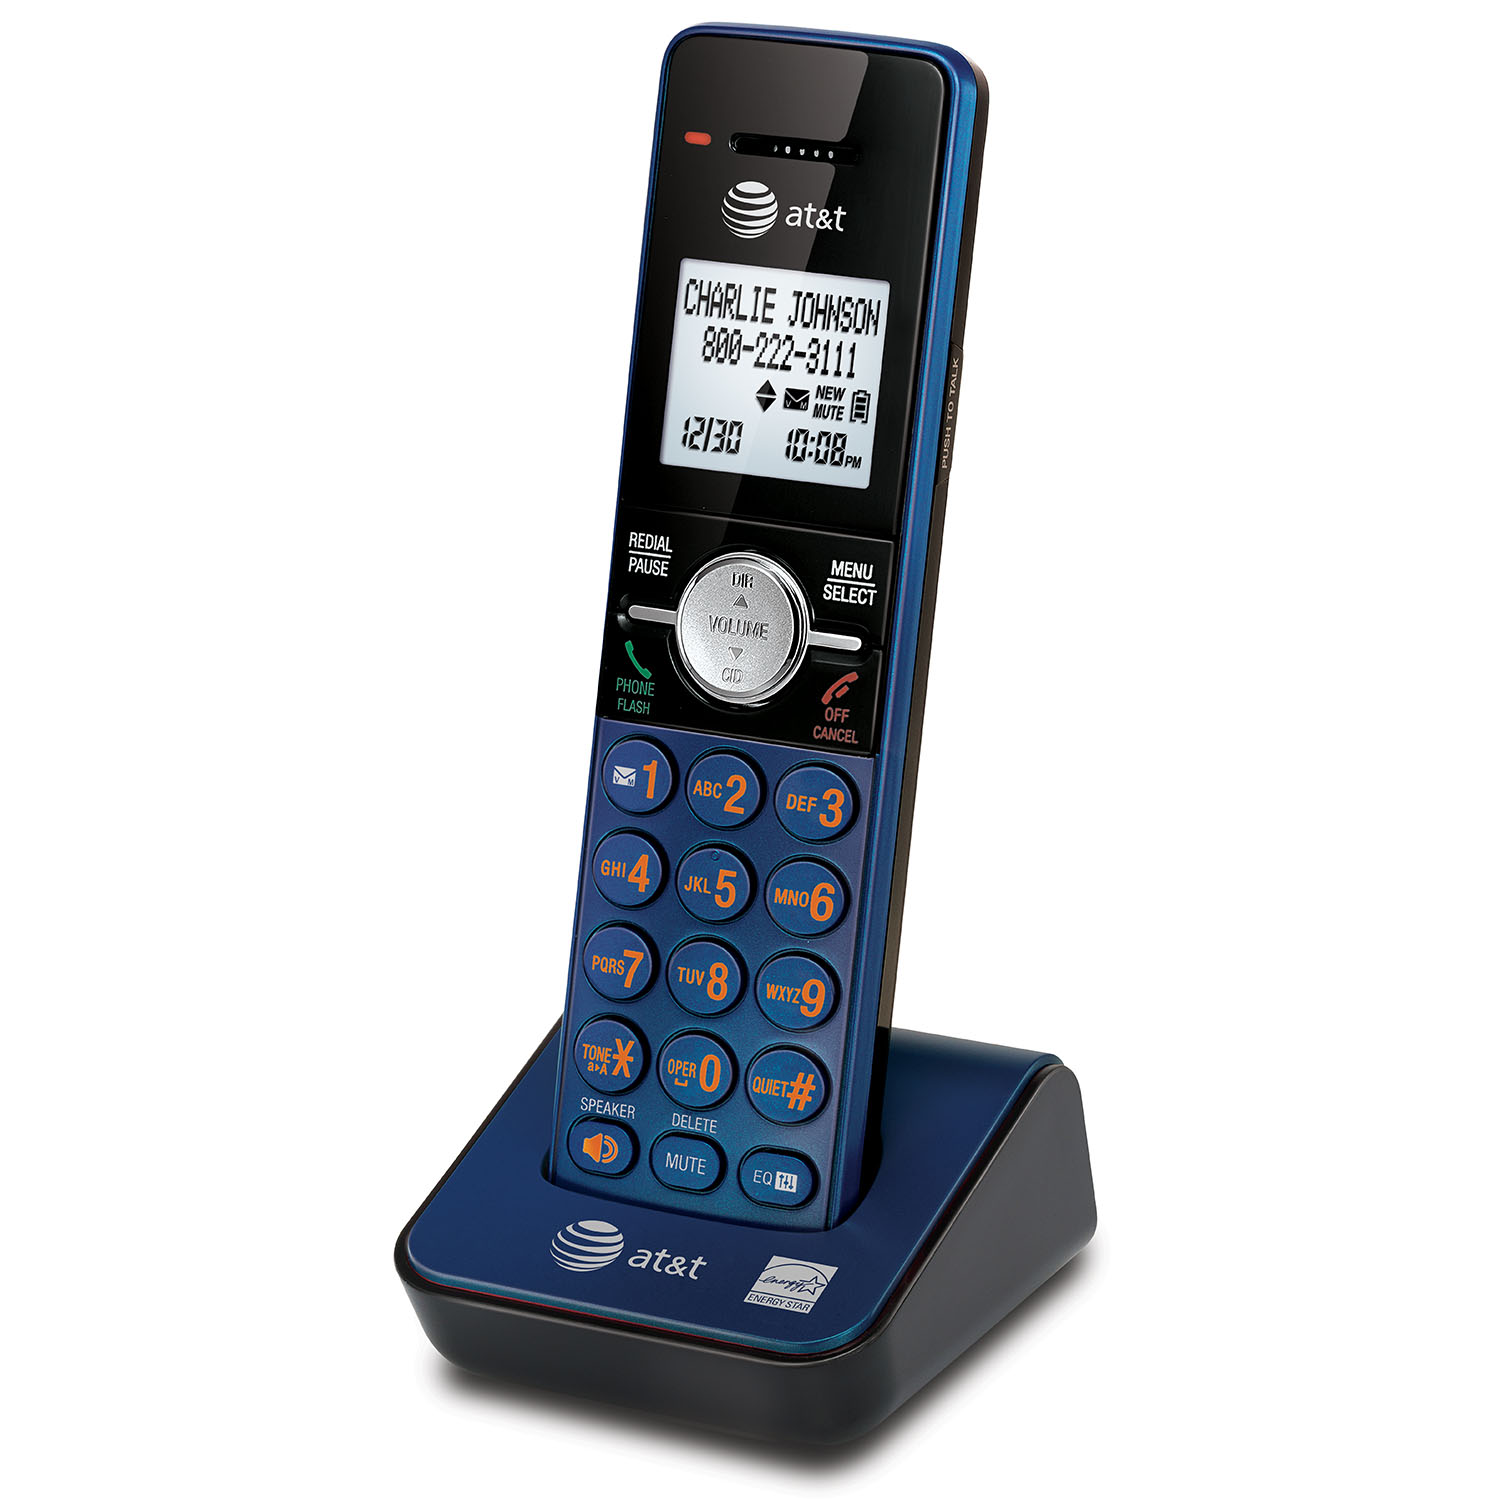 6 handset cordless answering system with caller ID/call waiting - view 4